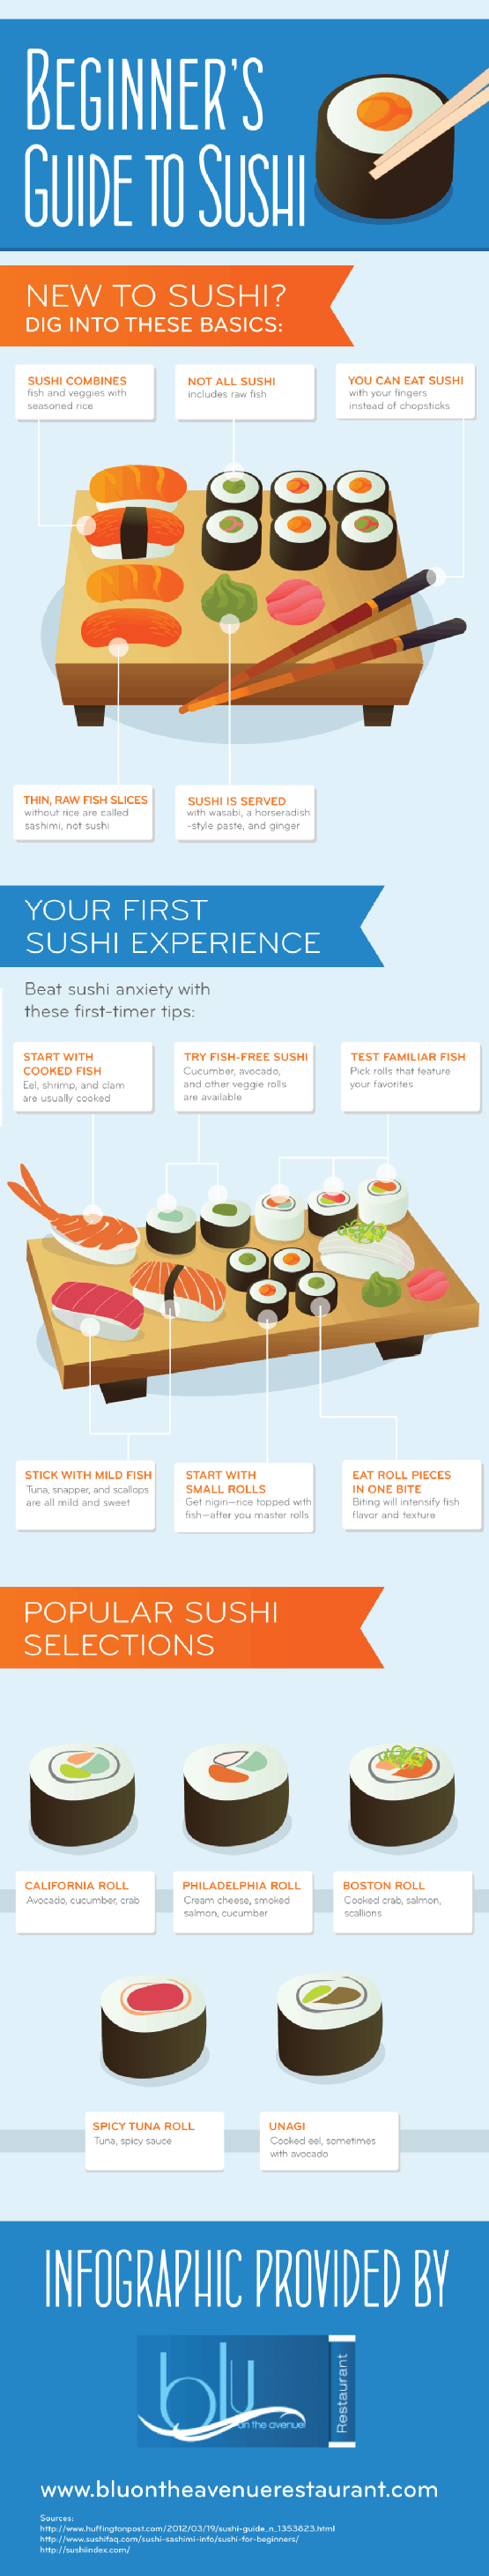 Beginner's Guide to Sushi